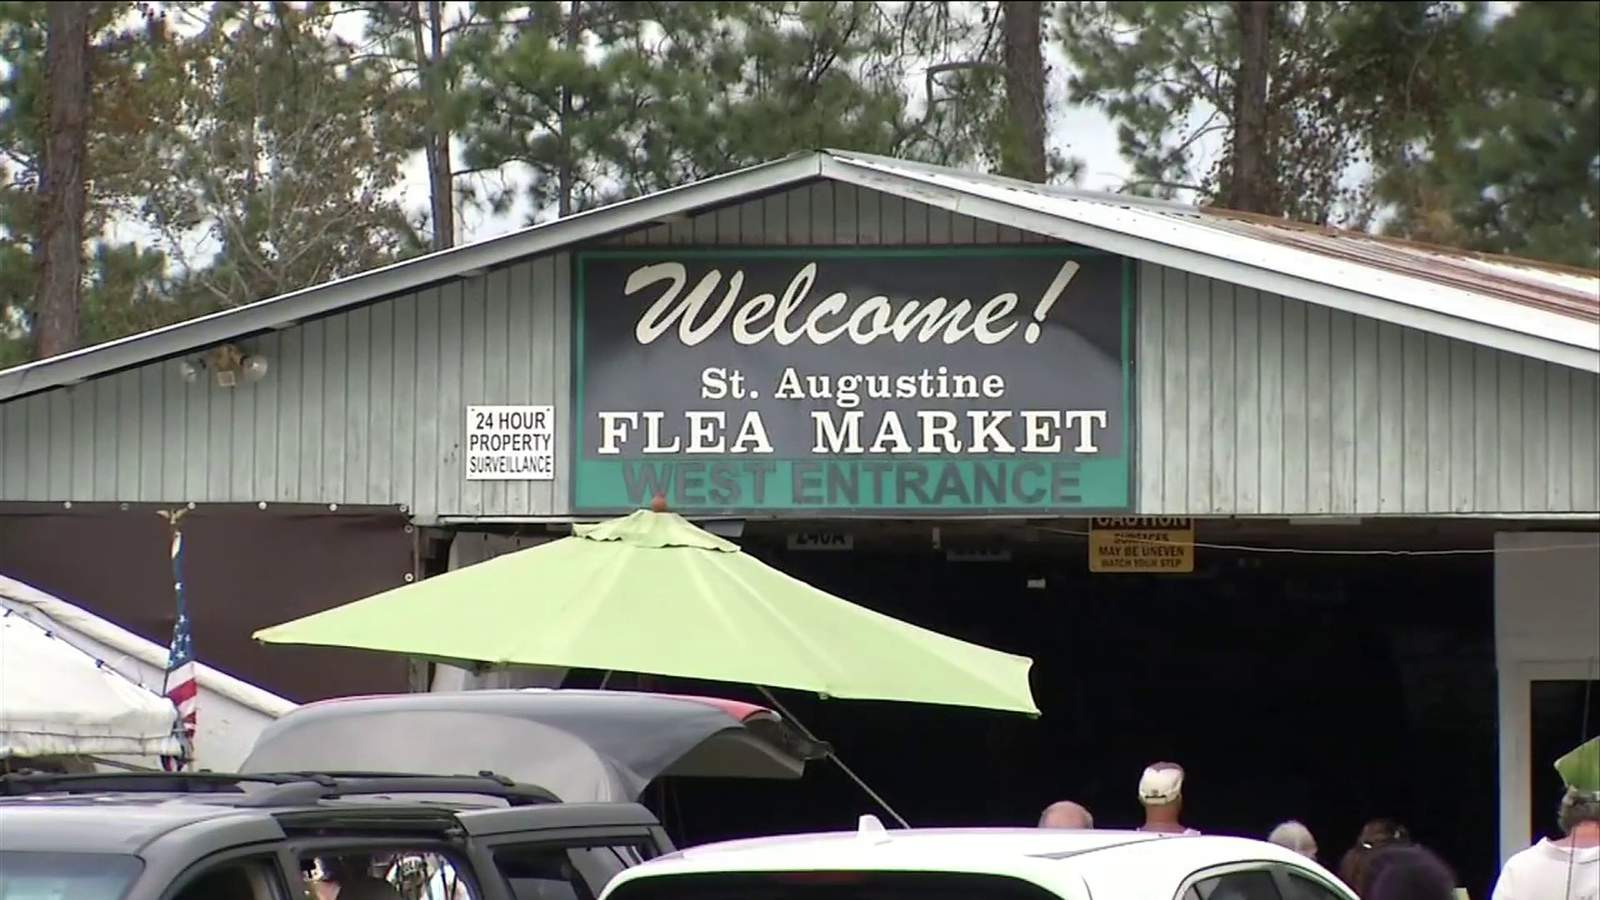 St. Augustine Flea Market closes after 35 years of business